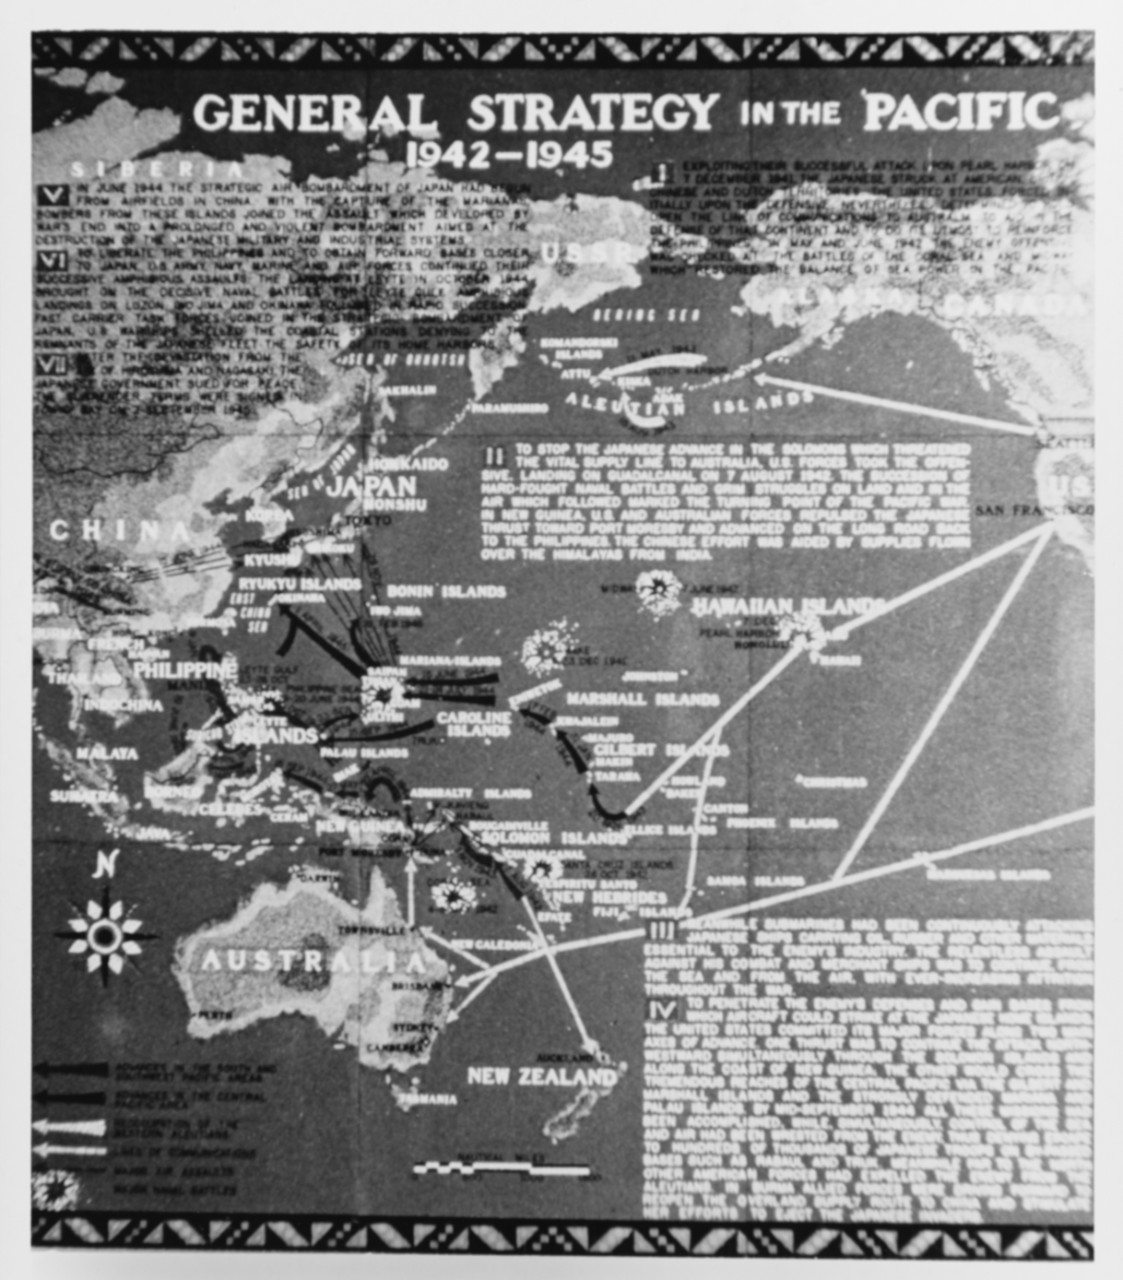 General Strategy in the Pacific 1942 - 1945